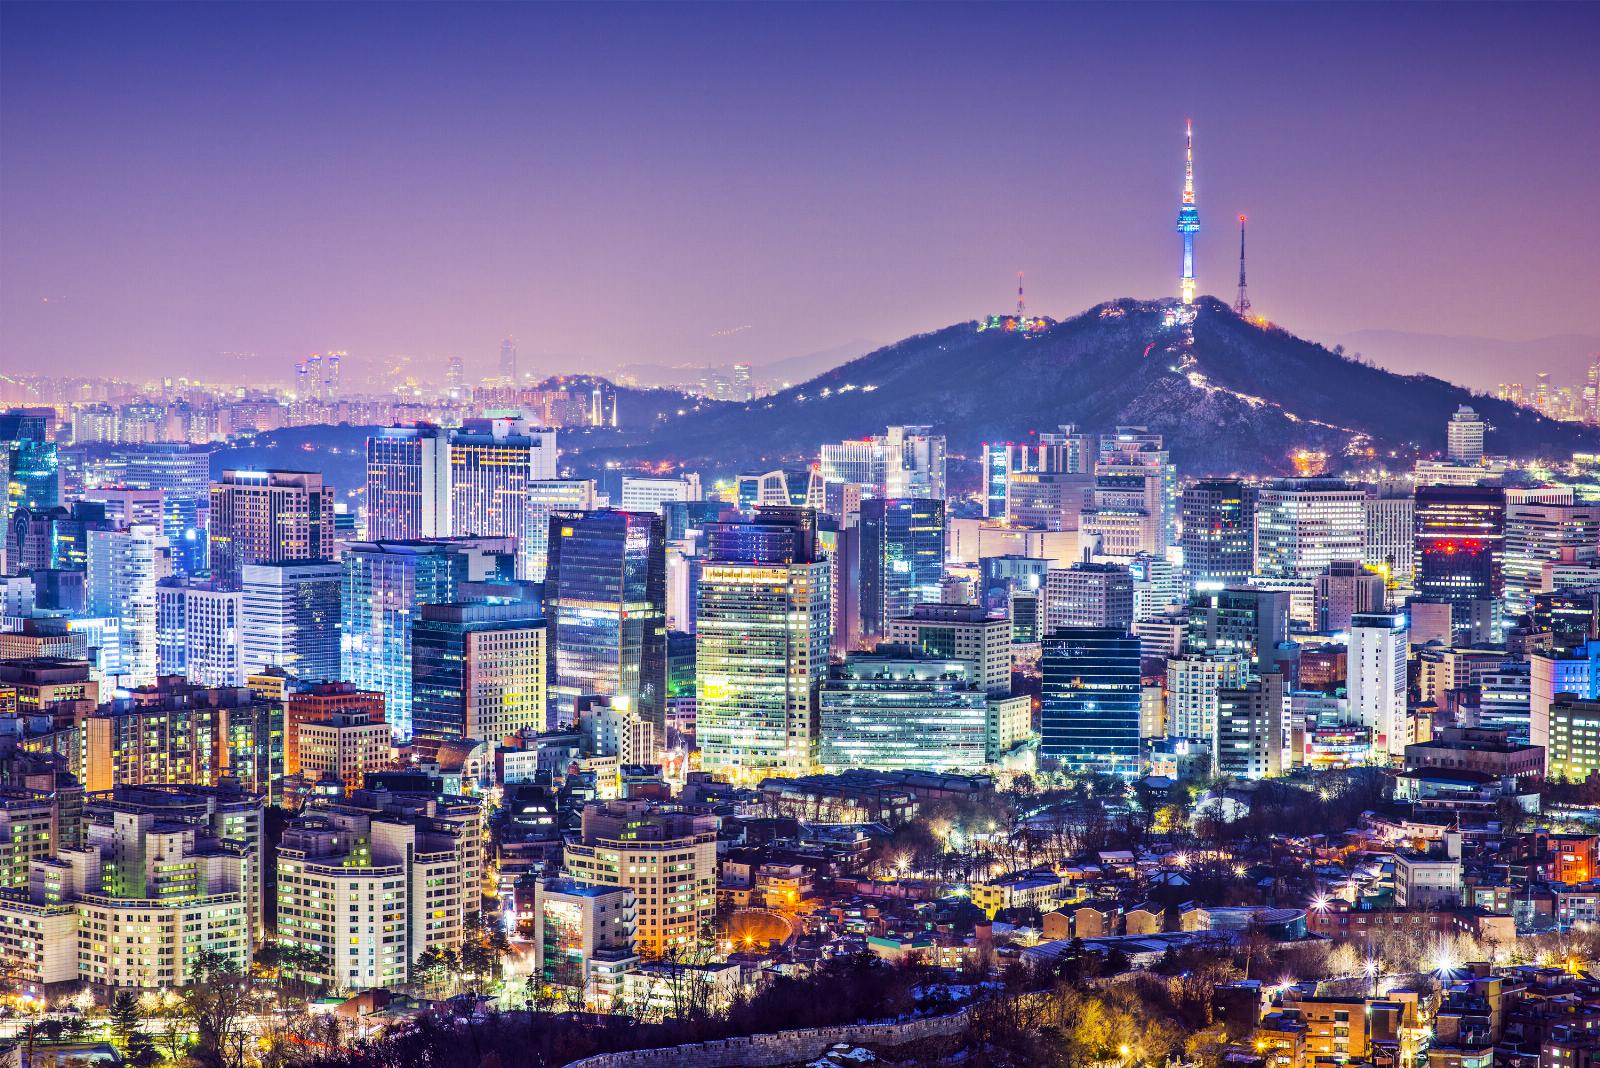 South Korea boosts its AI chip industry with $642M amid ChatGPT frenzy